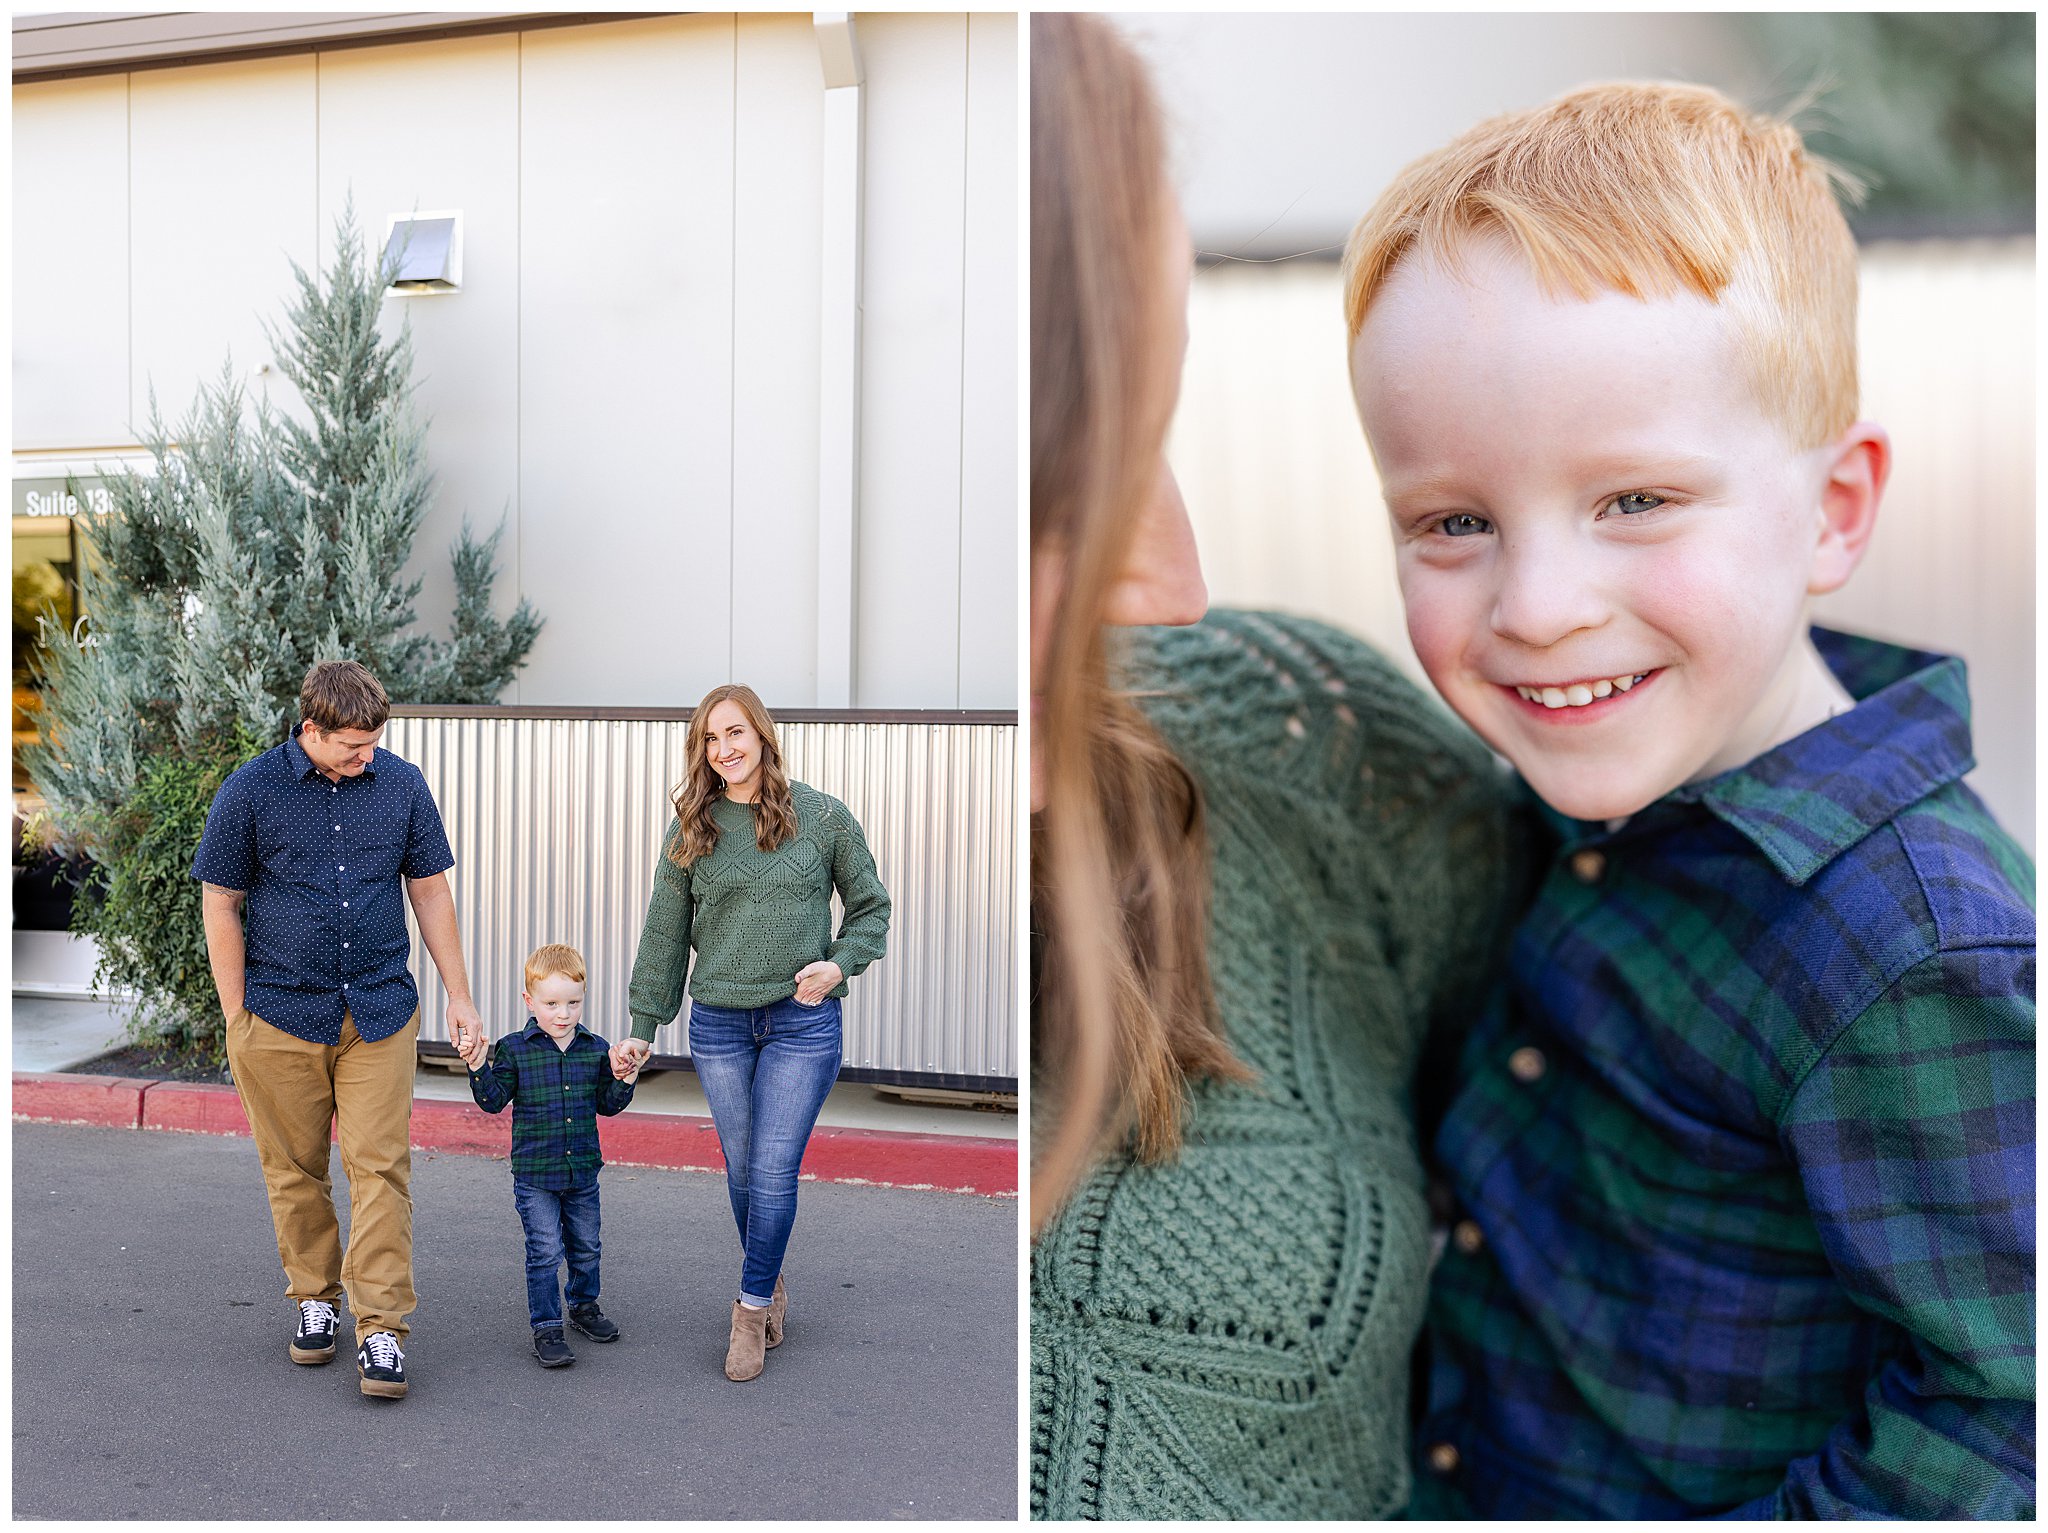 Fall Mini Sessions Meriam Park Chico CA Family White Wall Fall Colors Dress Baby Siblings,